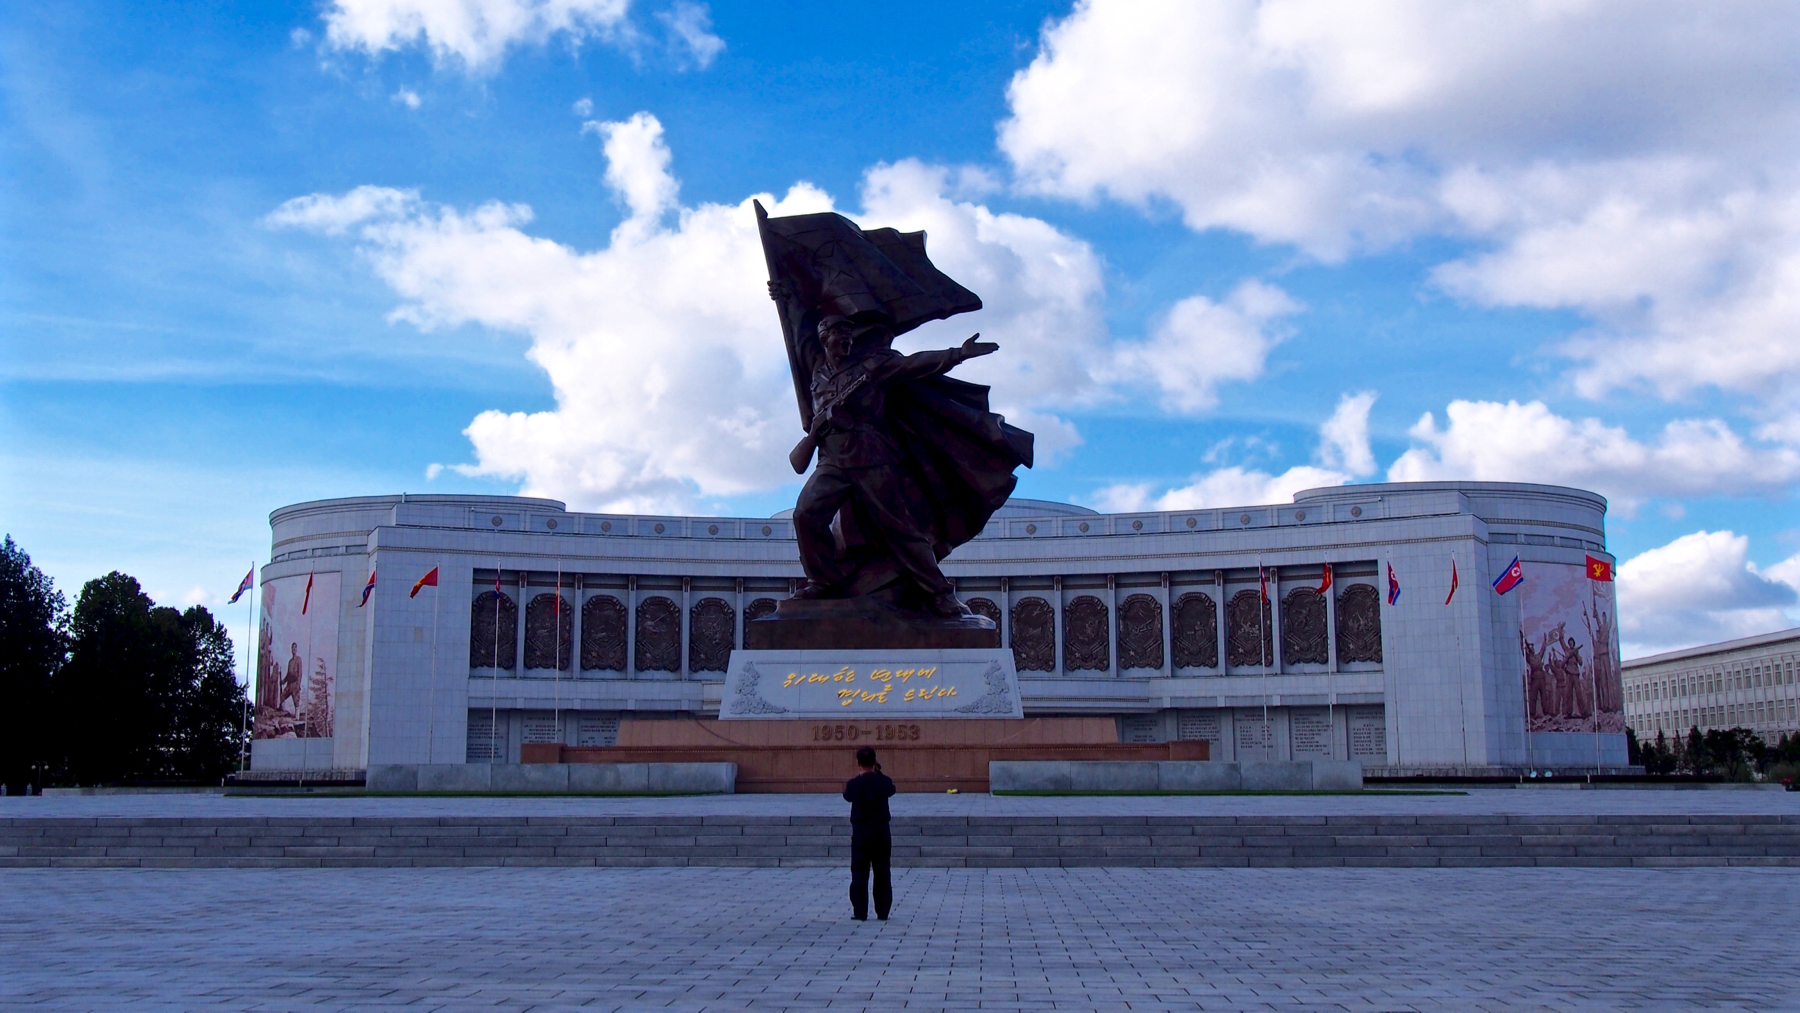 The war museum in Pyongyang, depicting a revolutionary soldier raising the flag of the DPRK. Our cameraman captures the moment we arrive, just as he captures all moments.